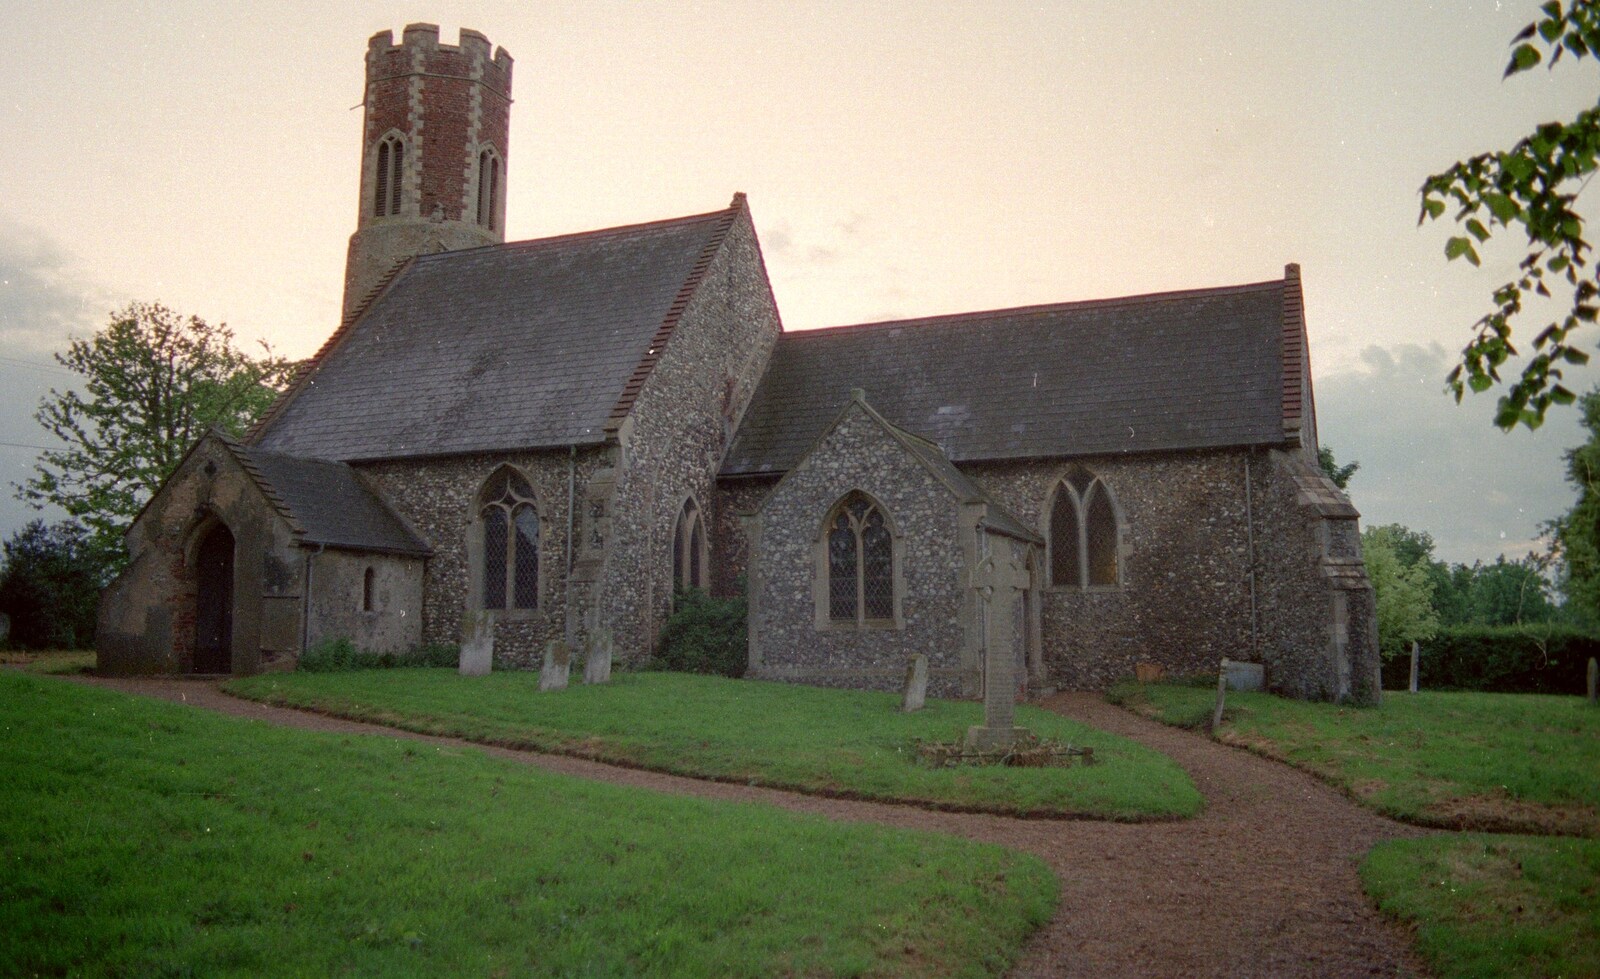 Sewell's Cottage Garden Telly, Red House, Norfolk - 14th May 1988: The church of St. Peter in Brampton, Norfolk